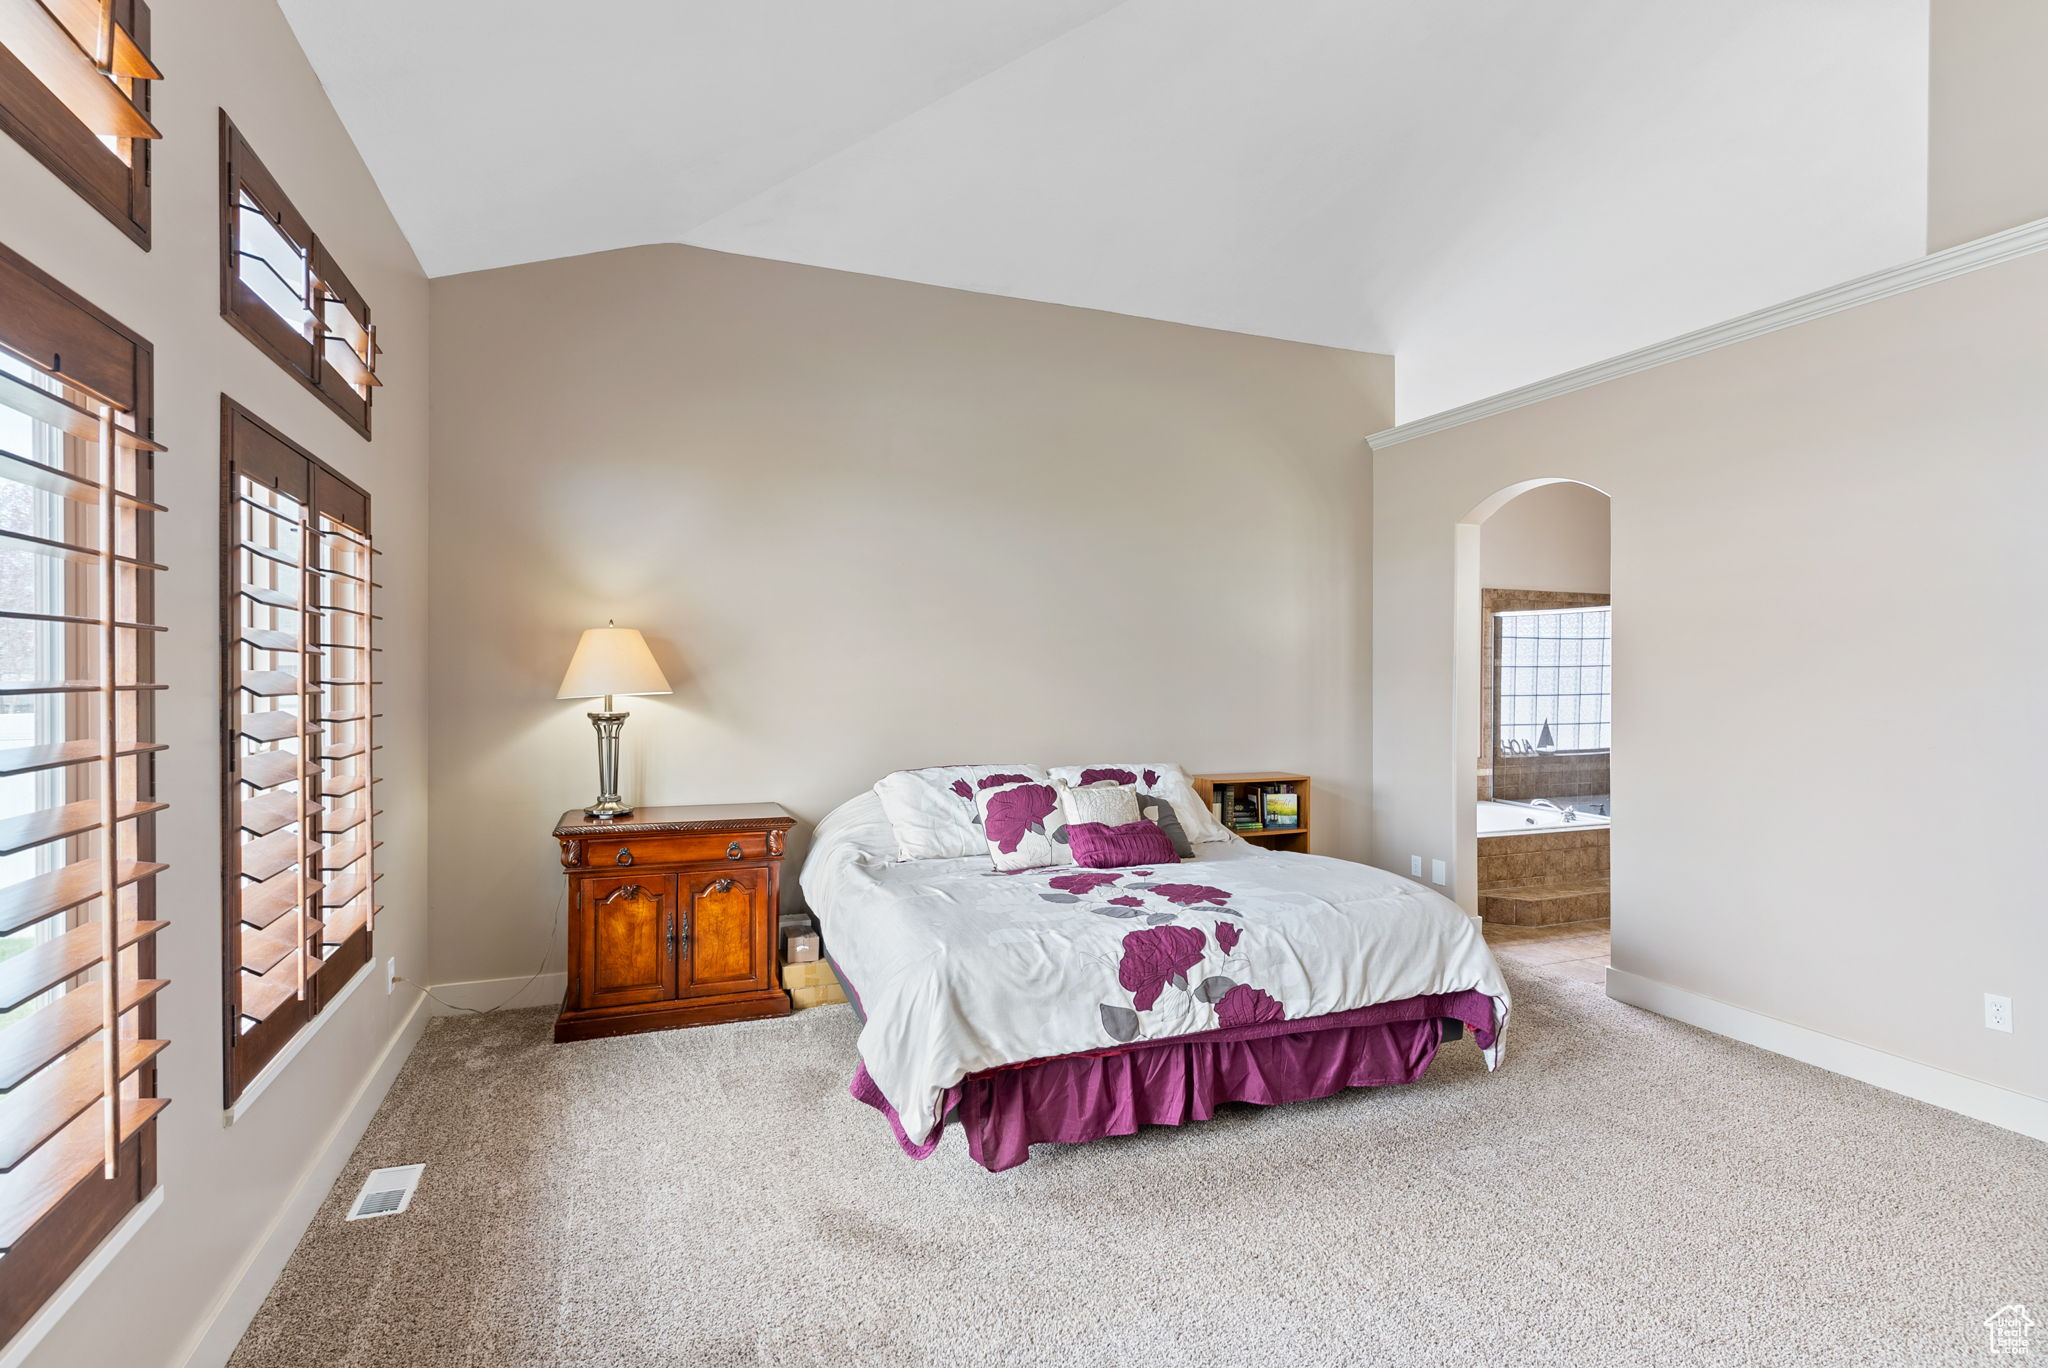 Bedroom featuring light colored carpet, vaulted ceiling, and ensuite bath